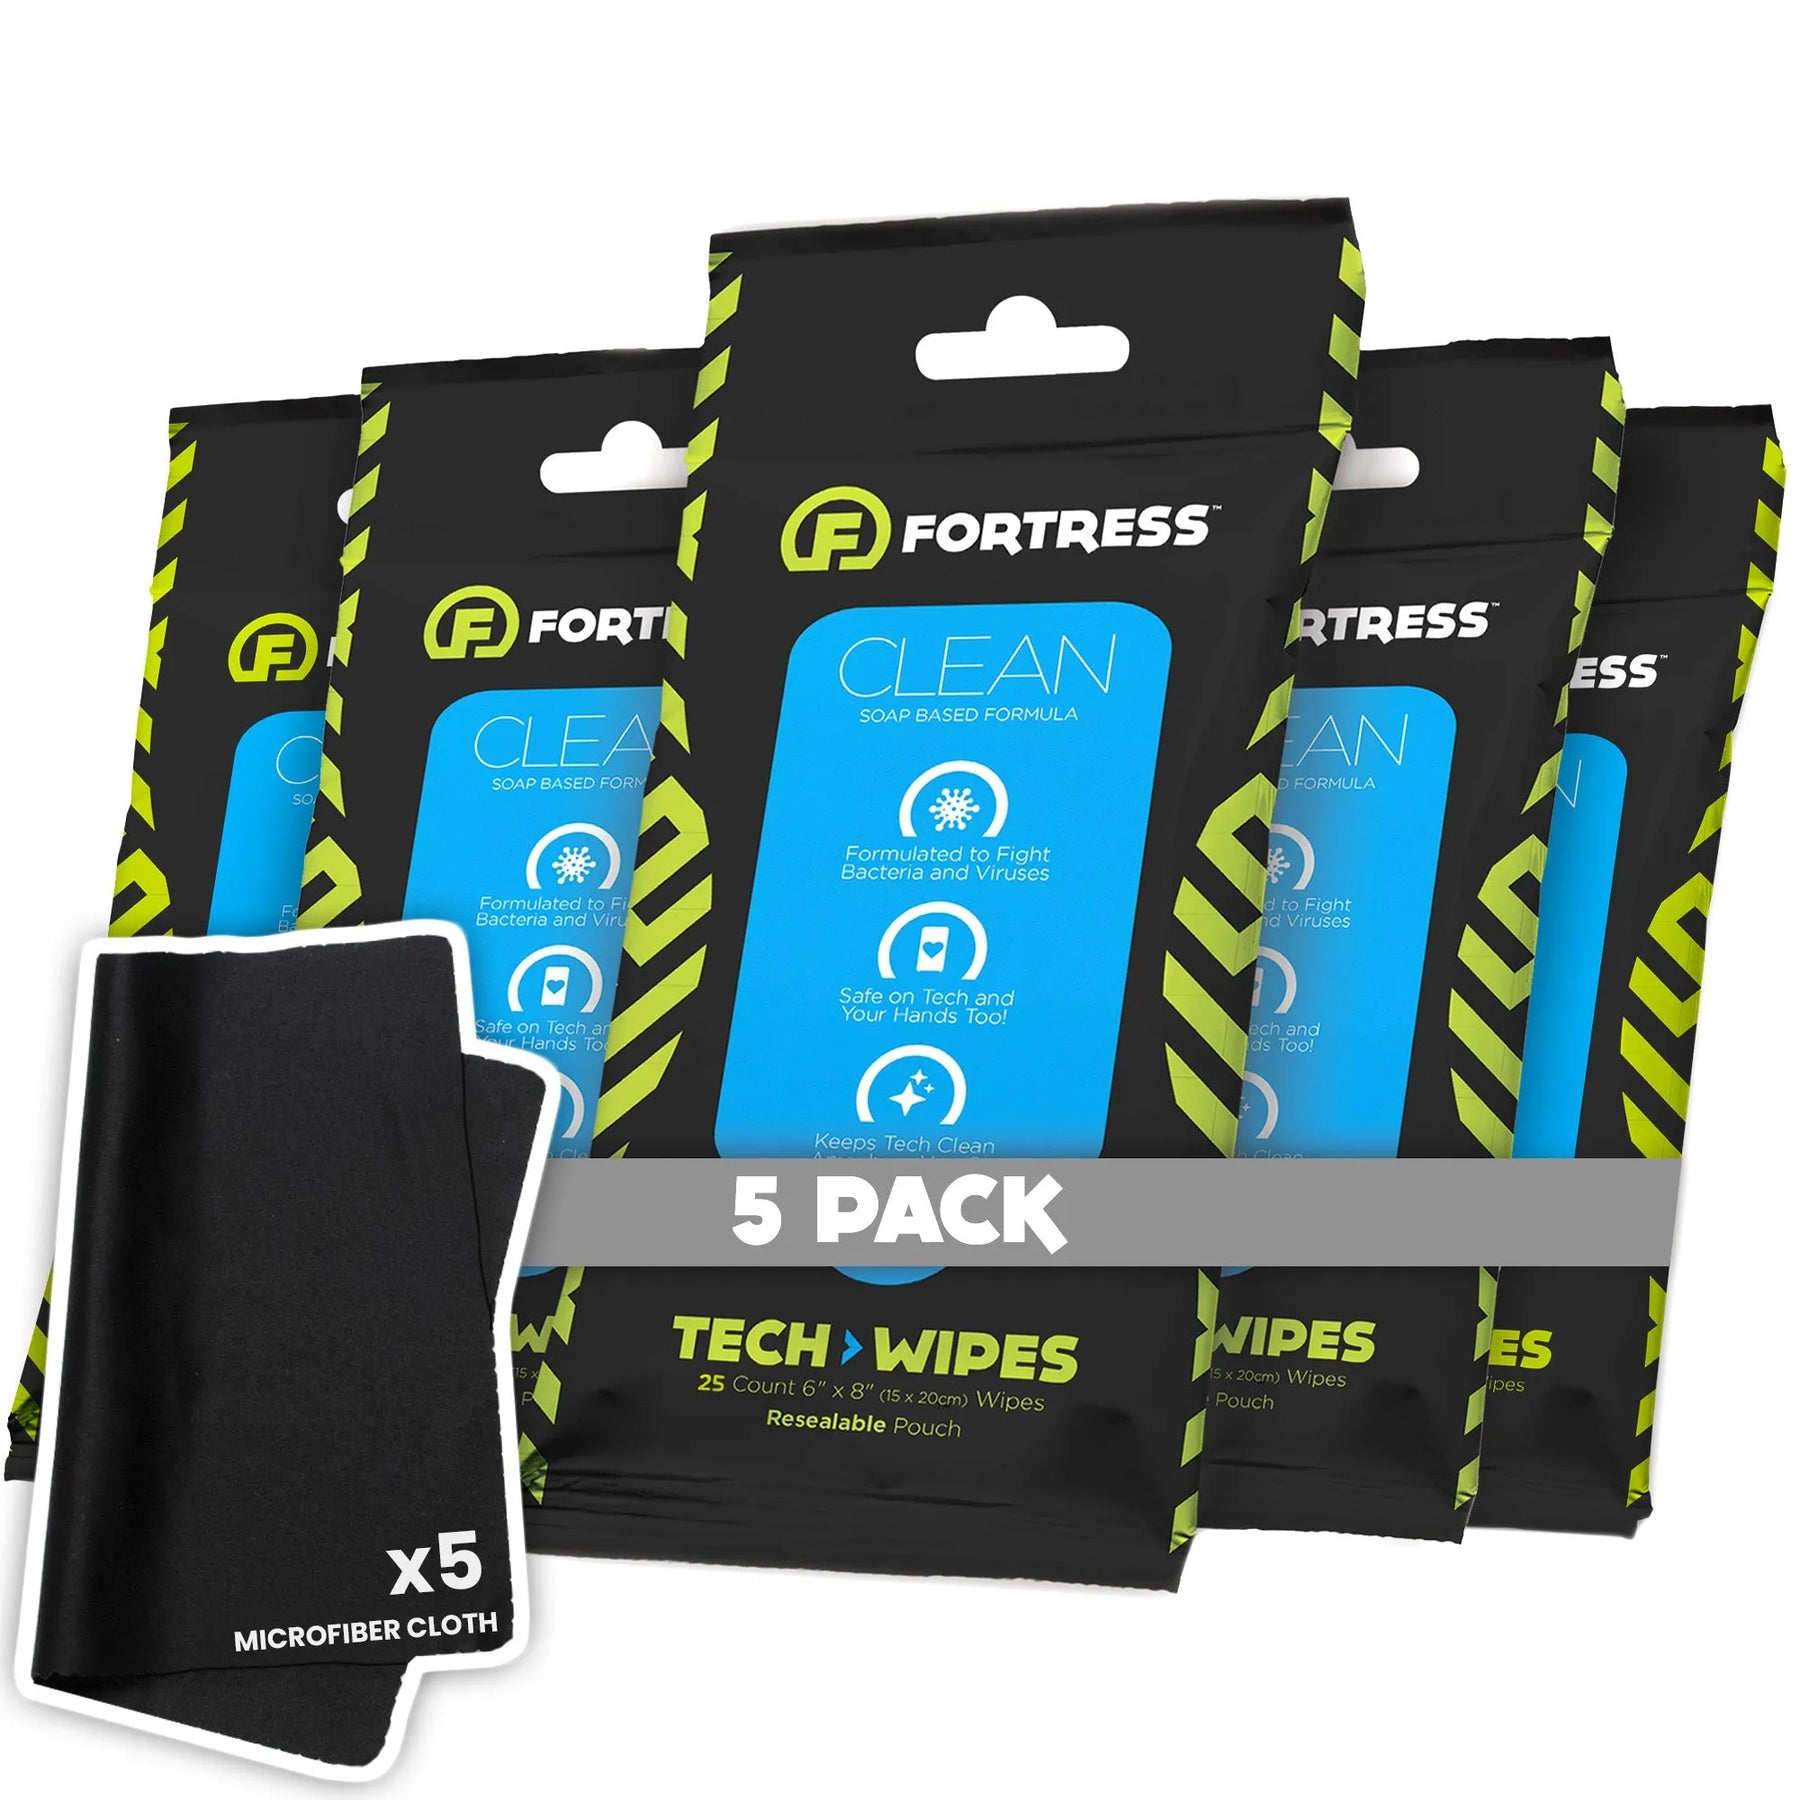 Fortress Fortress Tech Wipes (25 ct.) To-Go Disinfecting Wipes for Tech 5-PackYes Clean 22.99